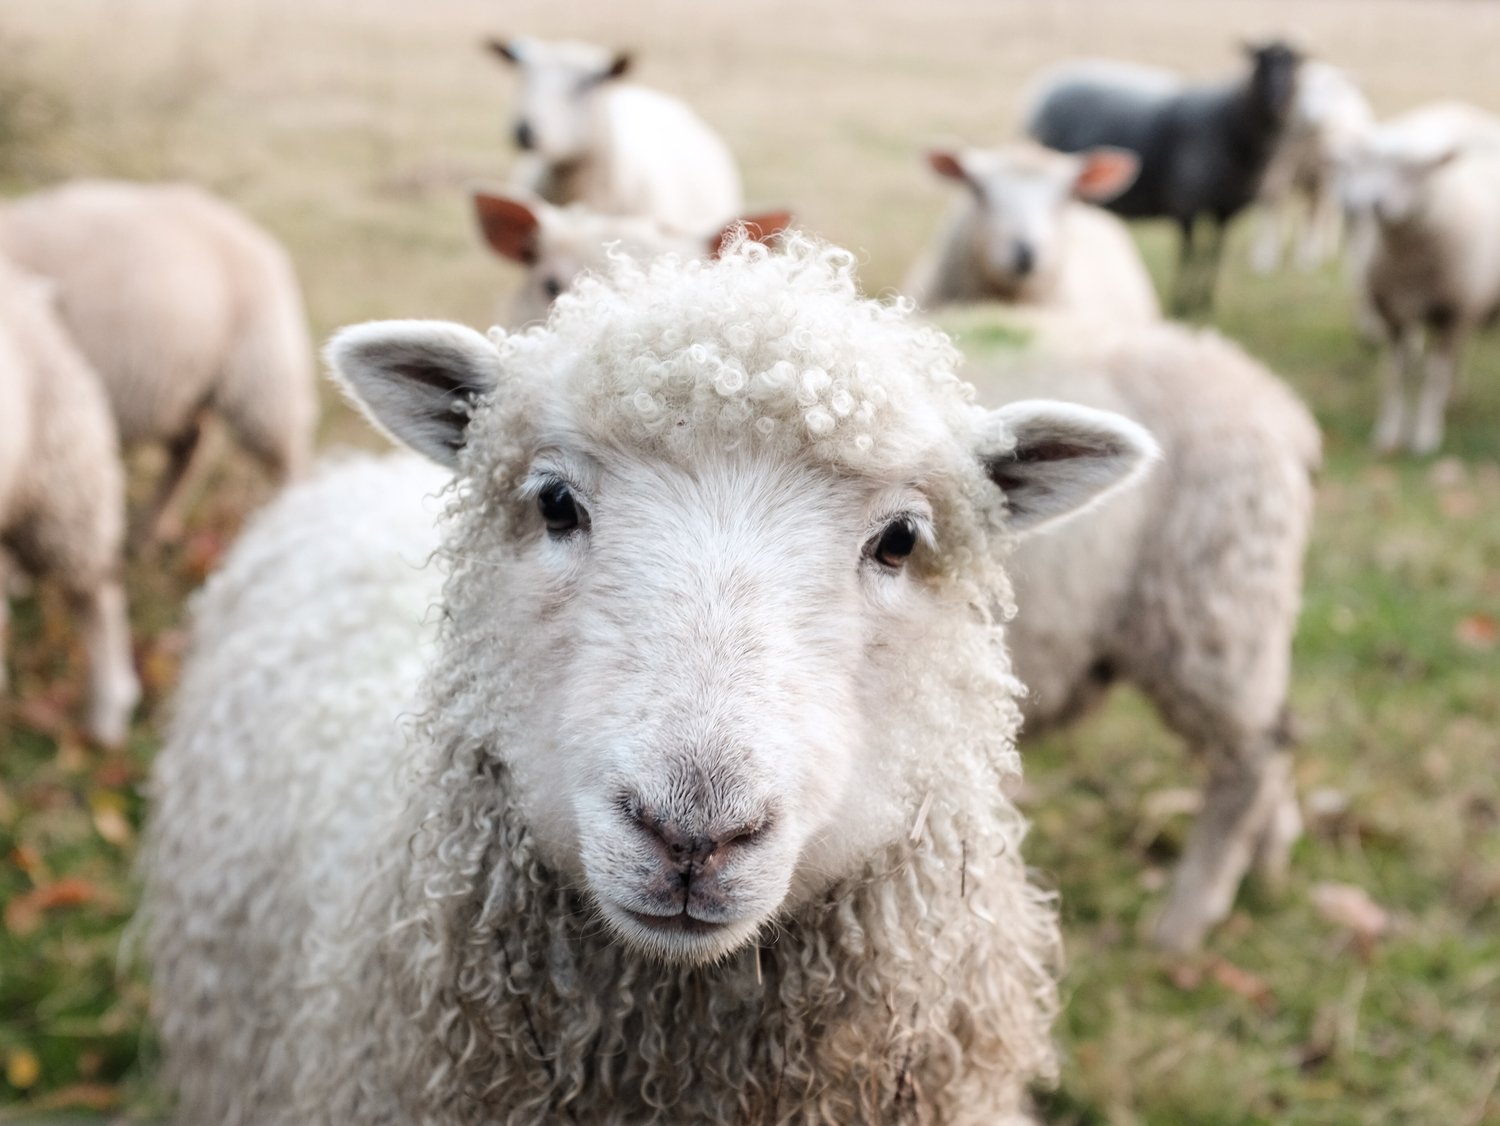 On Sunday, May 15, Apple Pond's Sonja Hedlund will introduce participants to her sheep and share her knowledge about the pleasures, hassles and benefits of raising sheep, and what you need to know before you start.